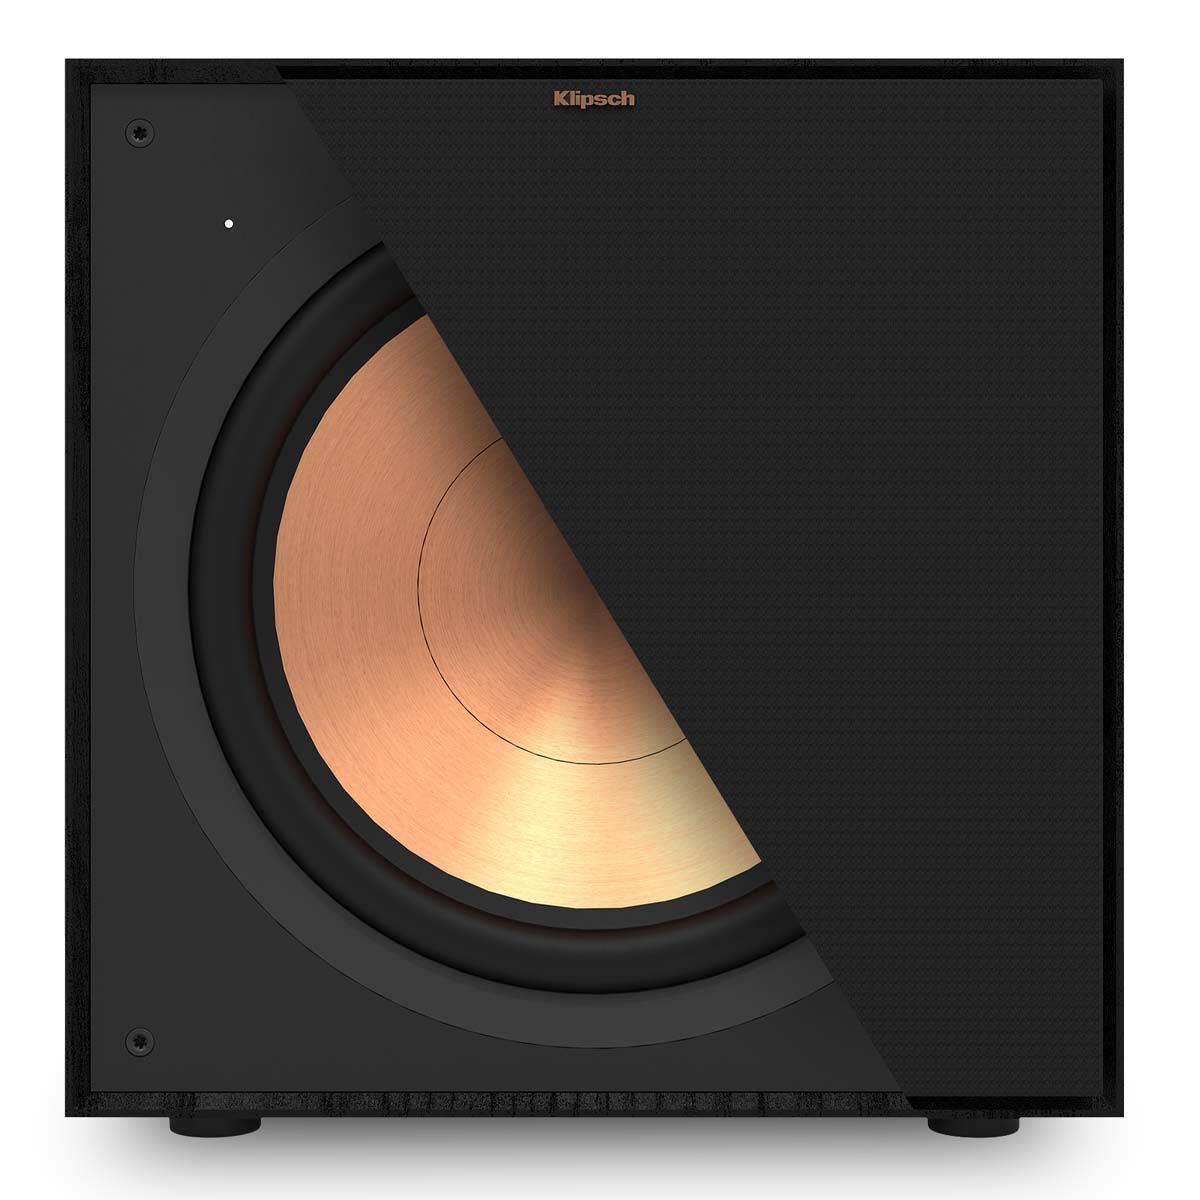 Klipsch R-121SW 12" Subwoofer - front view with partial grille